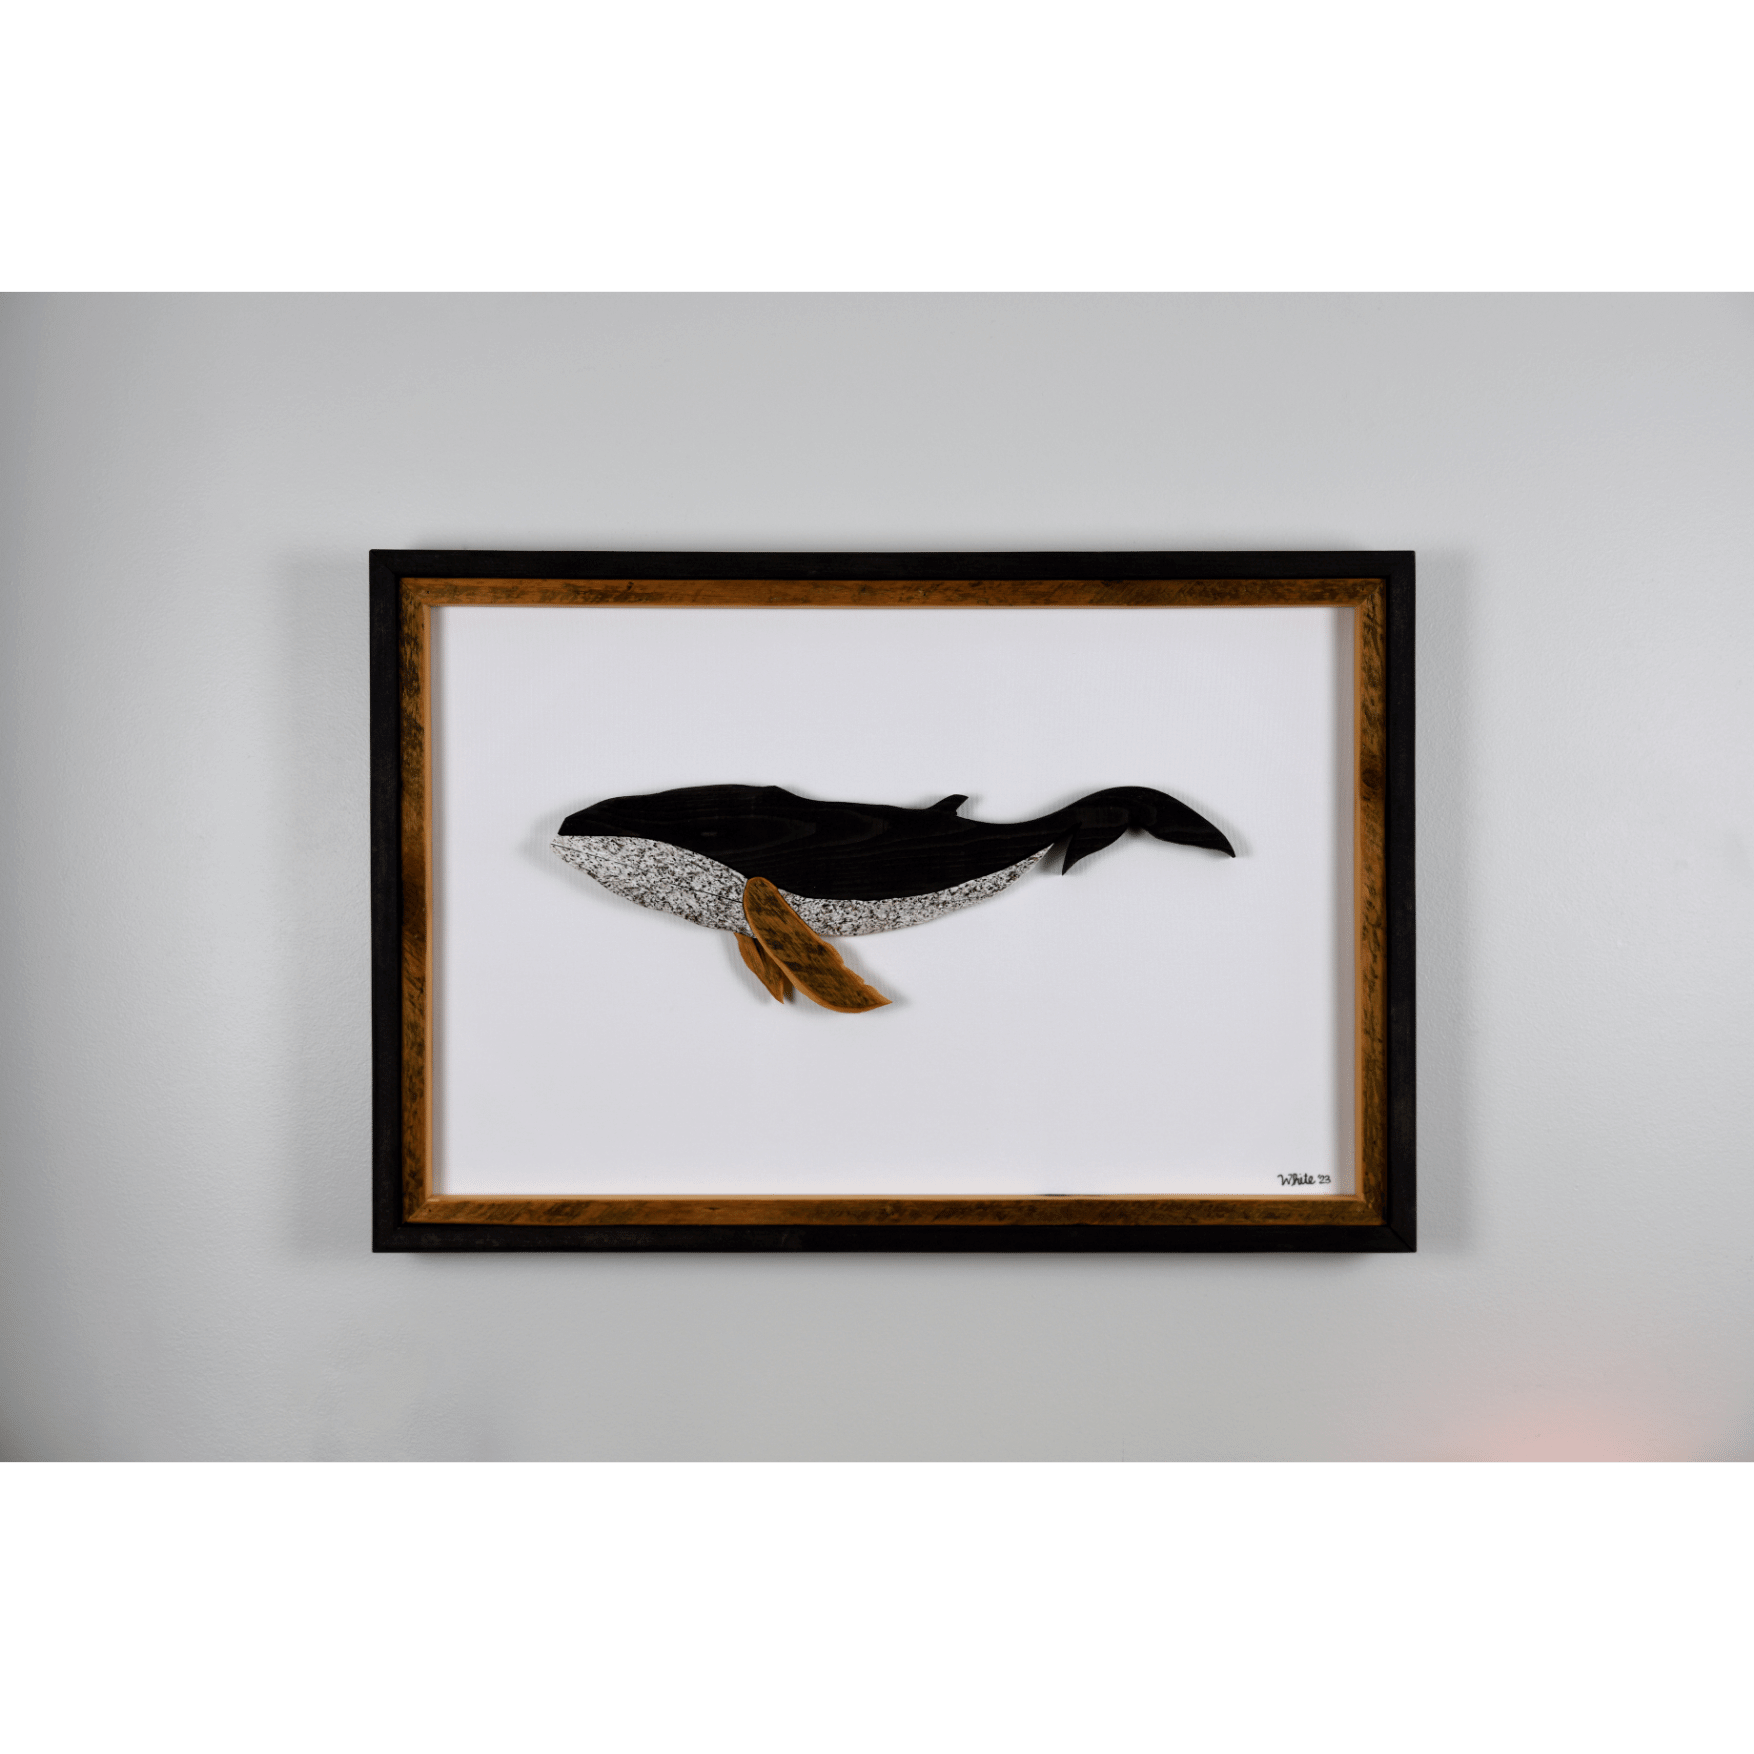 The Humpback showcases a humpback whale made from reclaimed wood and driftwood.